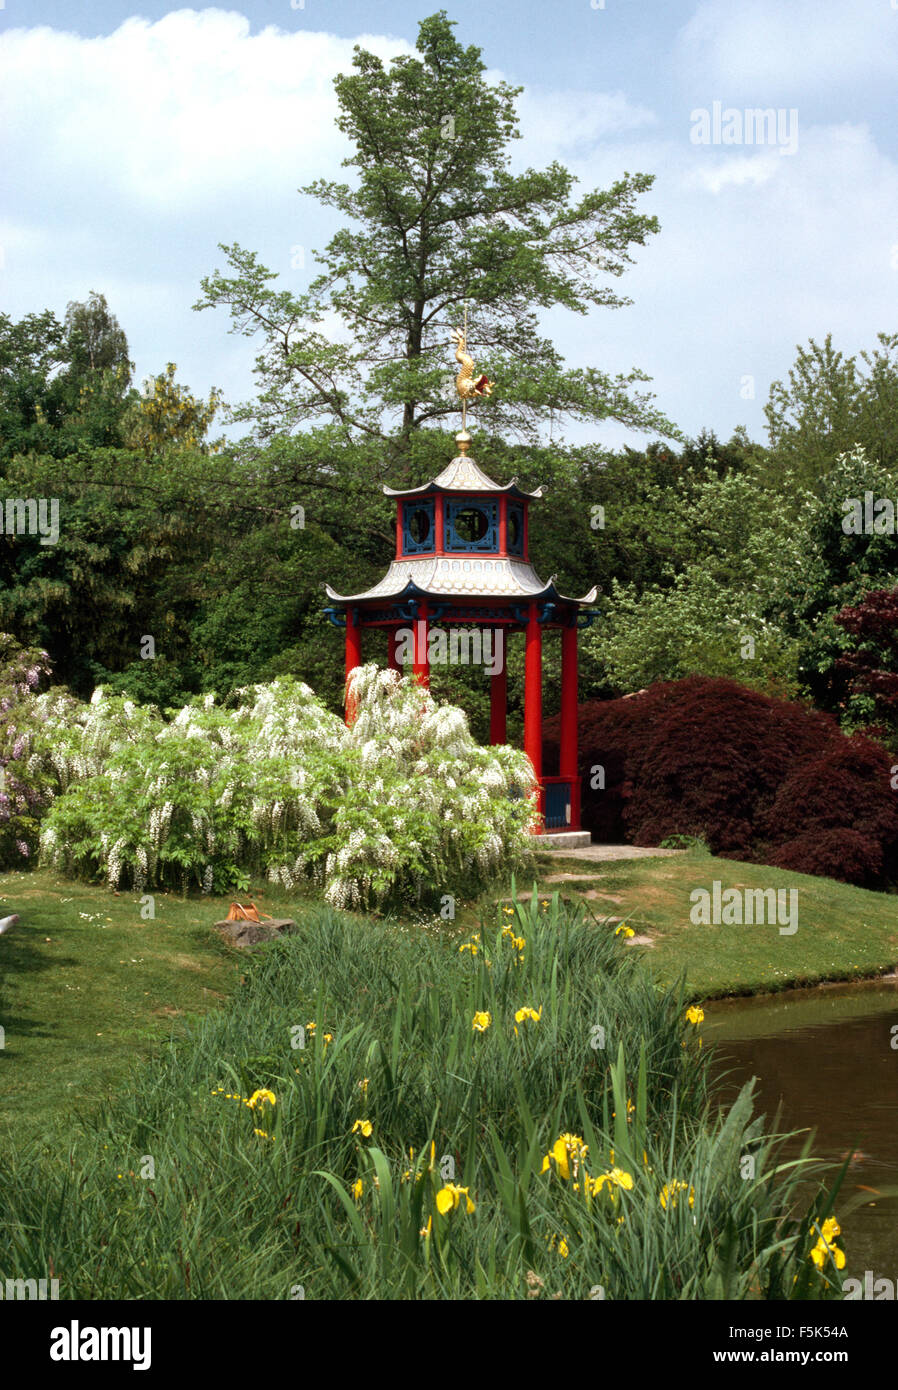 Yellow iris beside small lake in garden with white wisteria grown as a shrub beside a red Chinese pagoda Stock Photo